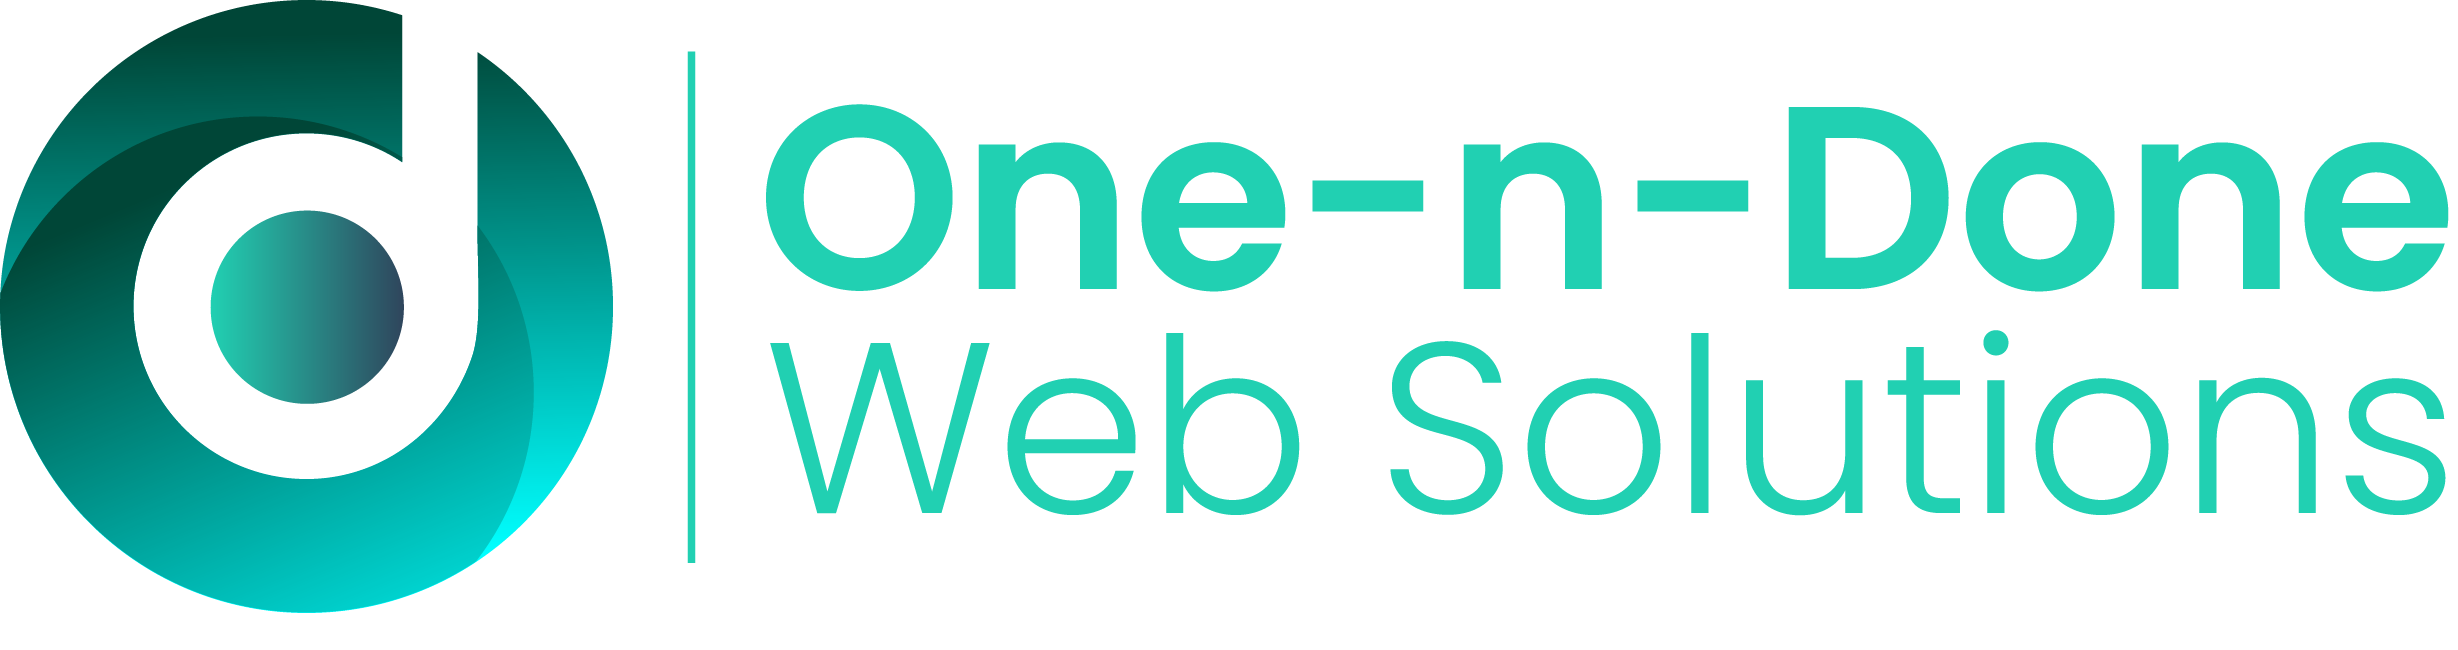 One-n-Done Web Solutions